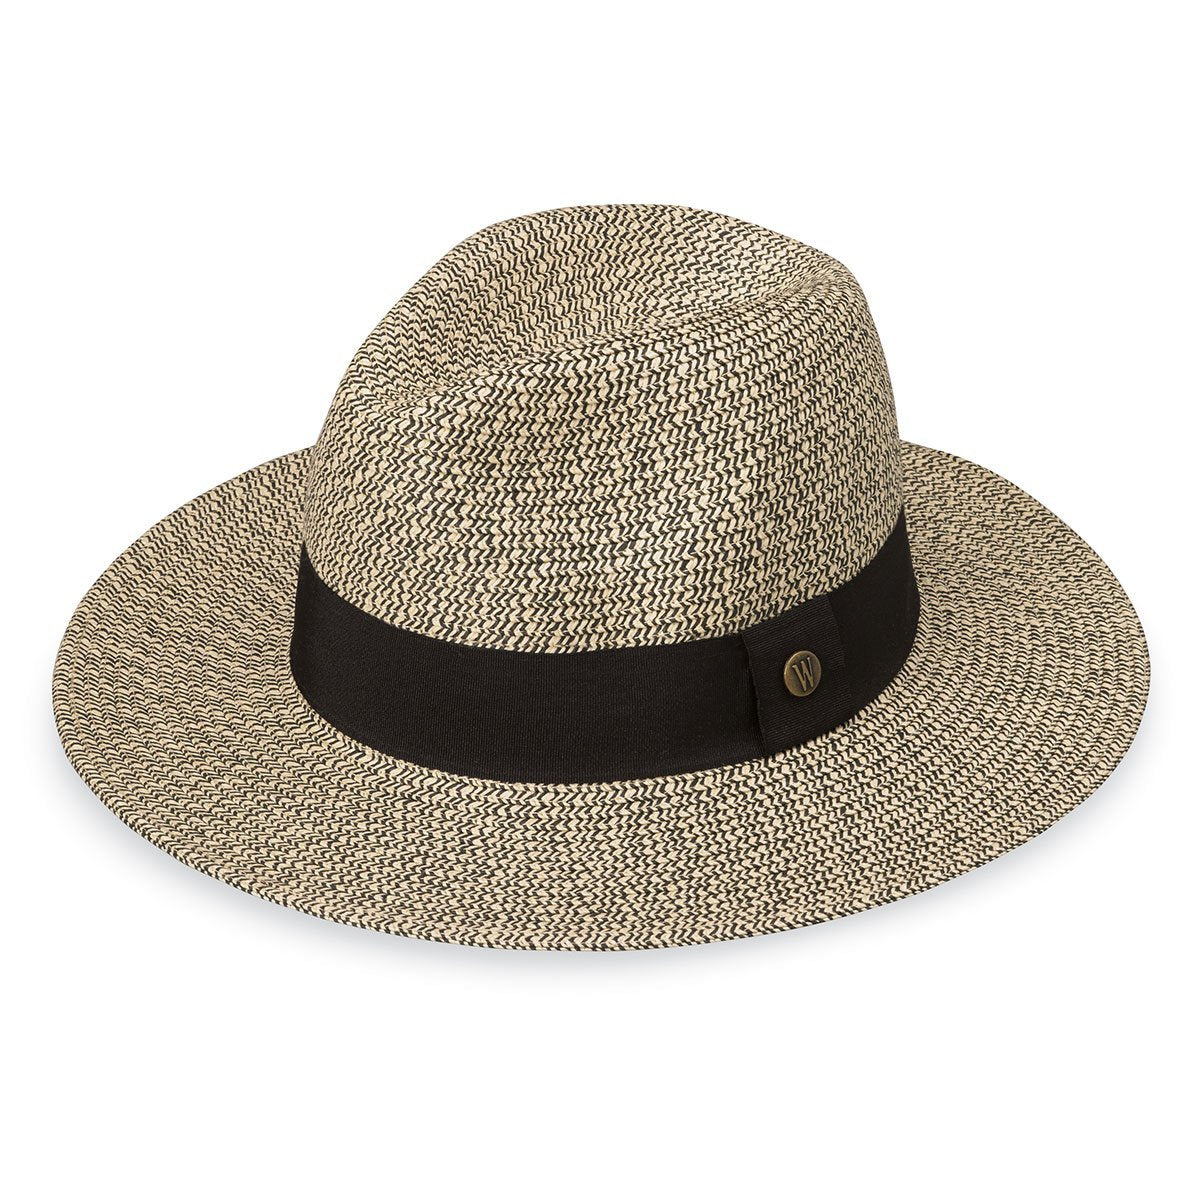 Featuring Ladies Packable Josie Fedora Style UPF Sun Hat in Mixed Black from Wallaroo